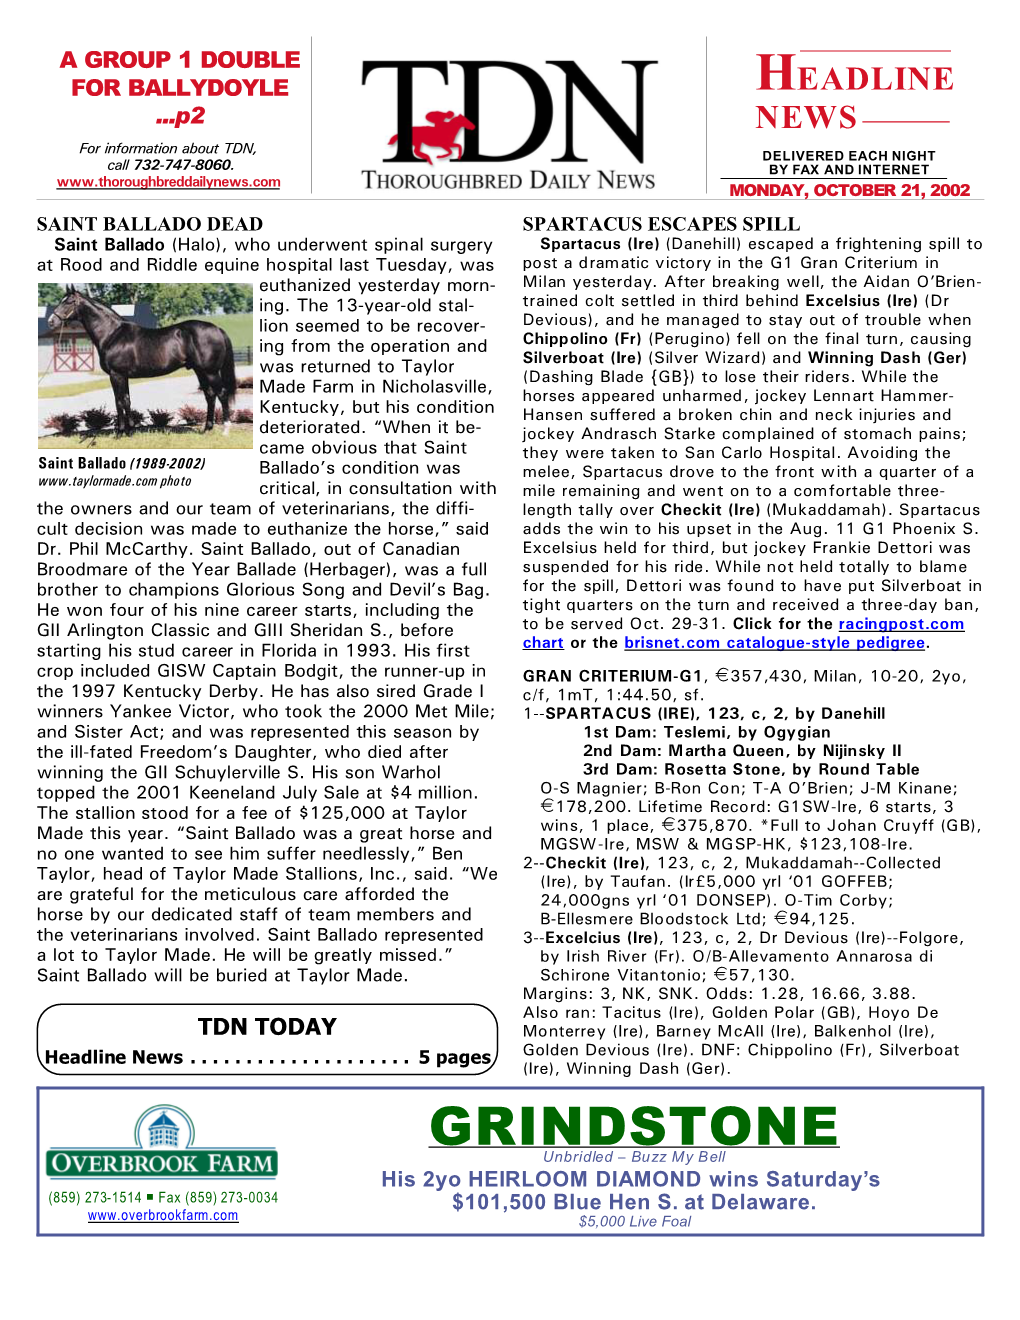 GRINDSTONE Unbridled S Buzz My Bell His 2Yo HEIRLOOM DIAMOND Wins Saturday’S (859) 273-1514 P Fax (859) 273-0034 $101,500 Blue Hen S